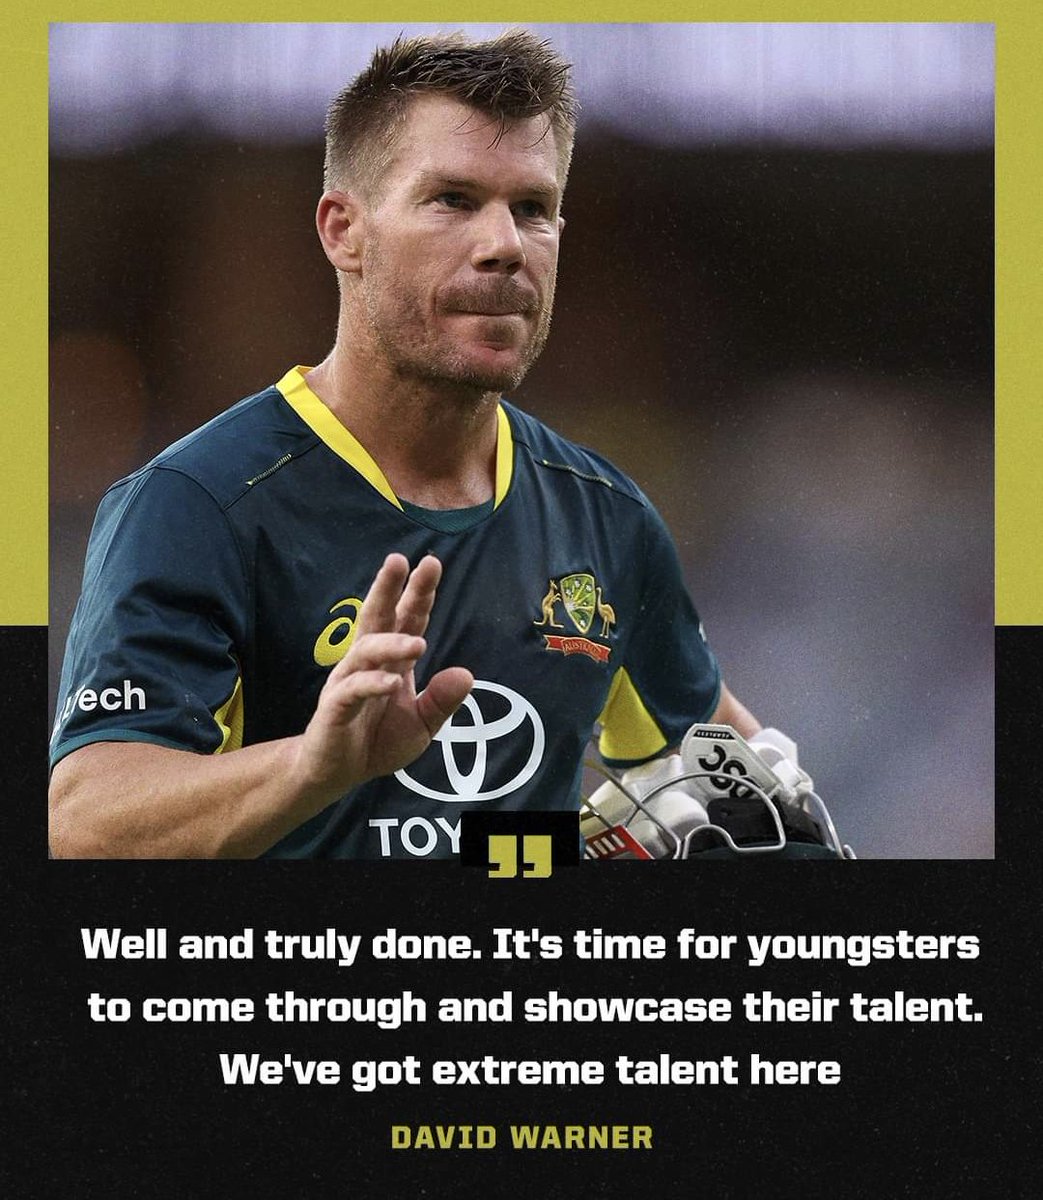 PLAYED FOR HOME AT HOME ONE LAST TIME 
FAREWELL WARNER
#DavidWarner #AUSvsWI